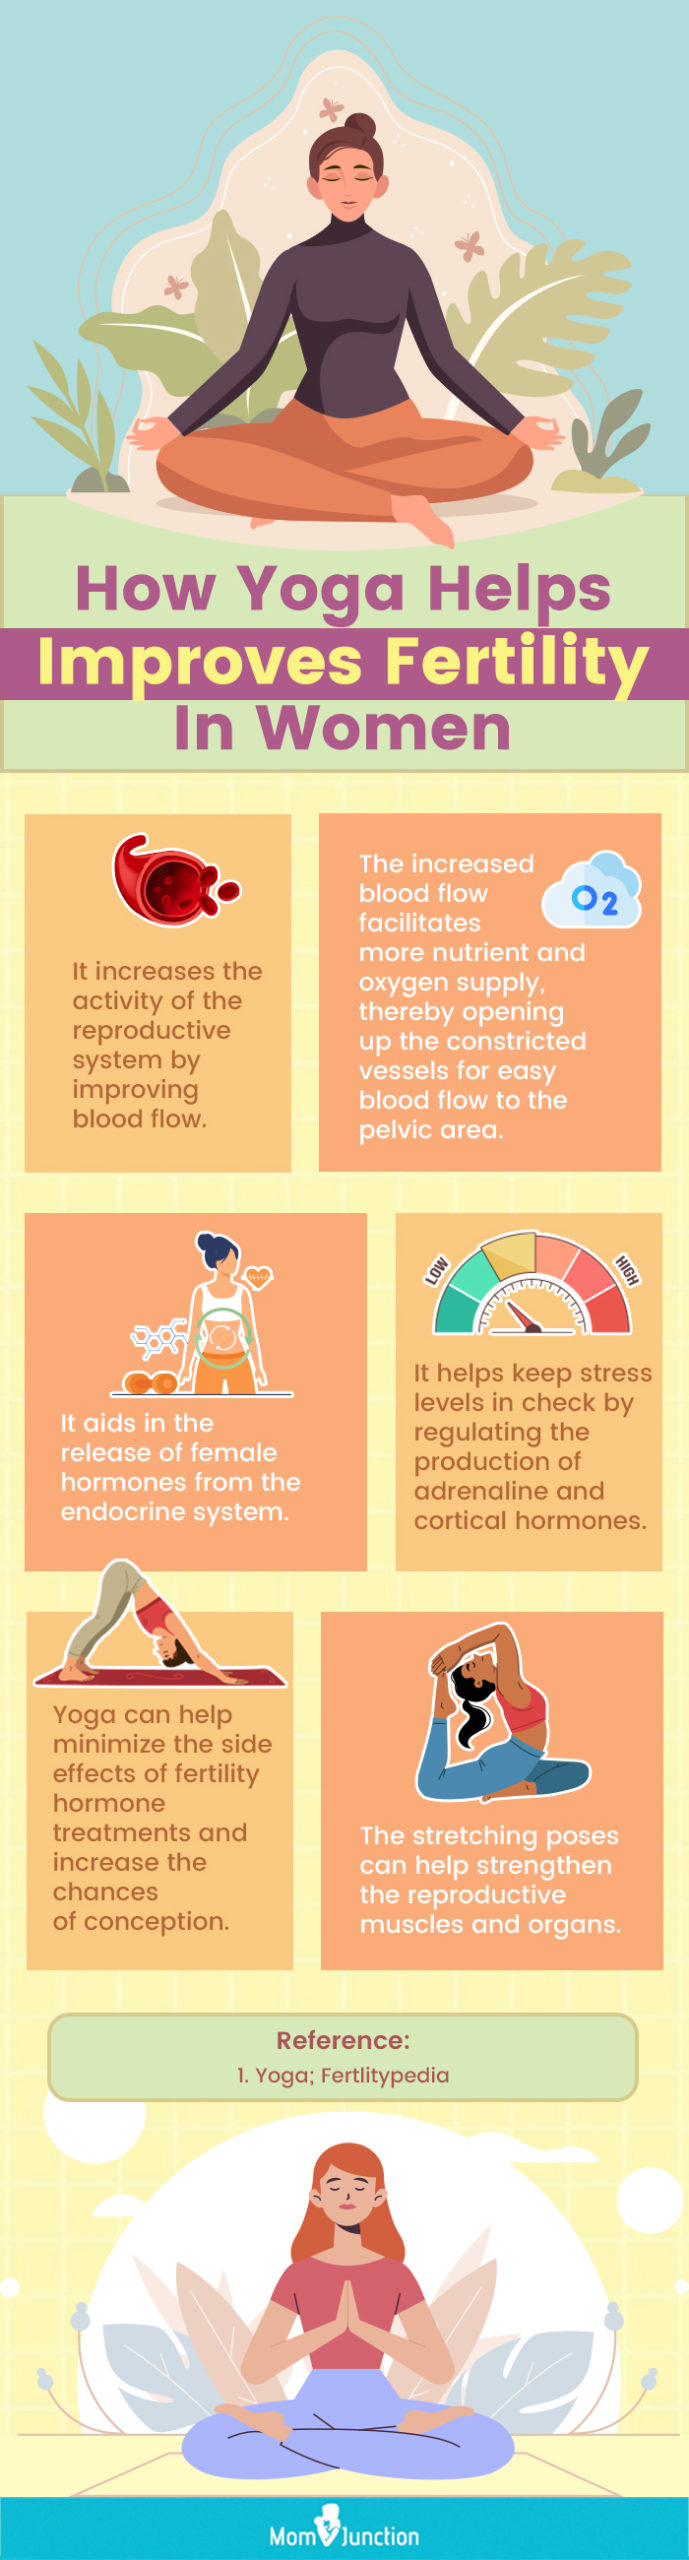 how yoga helps improves fertility in women (infographic)